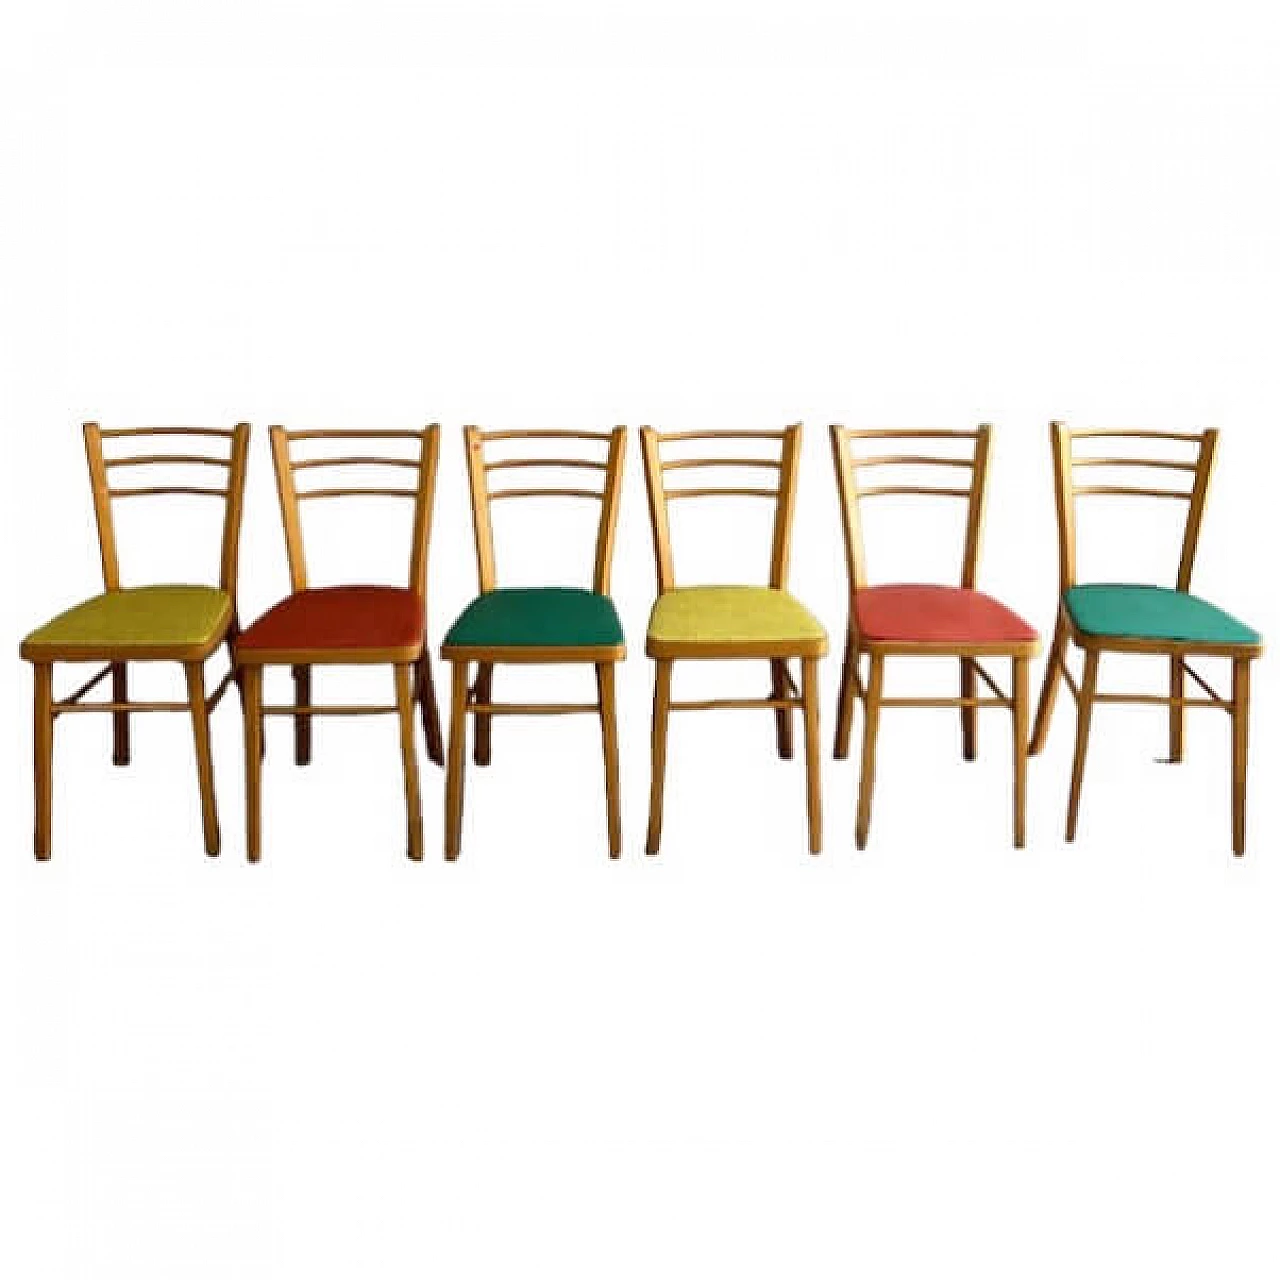 6 Chairs in wood and colored skai, 1960s 11